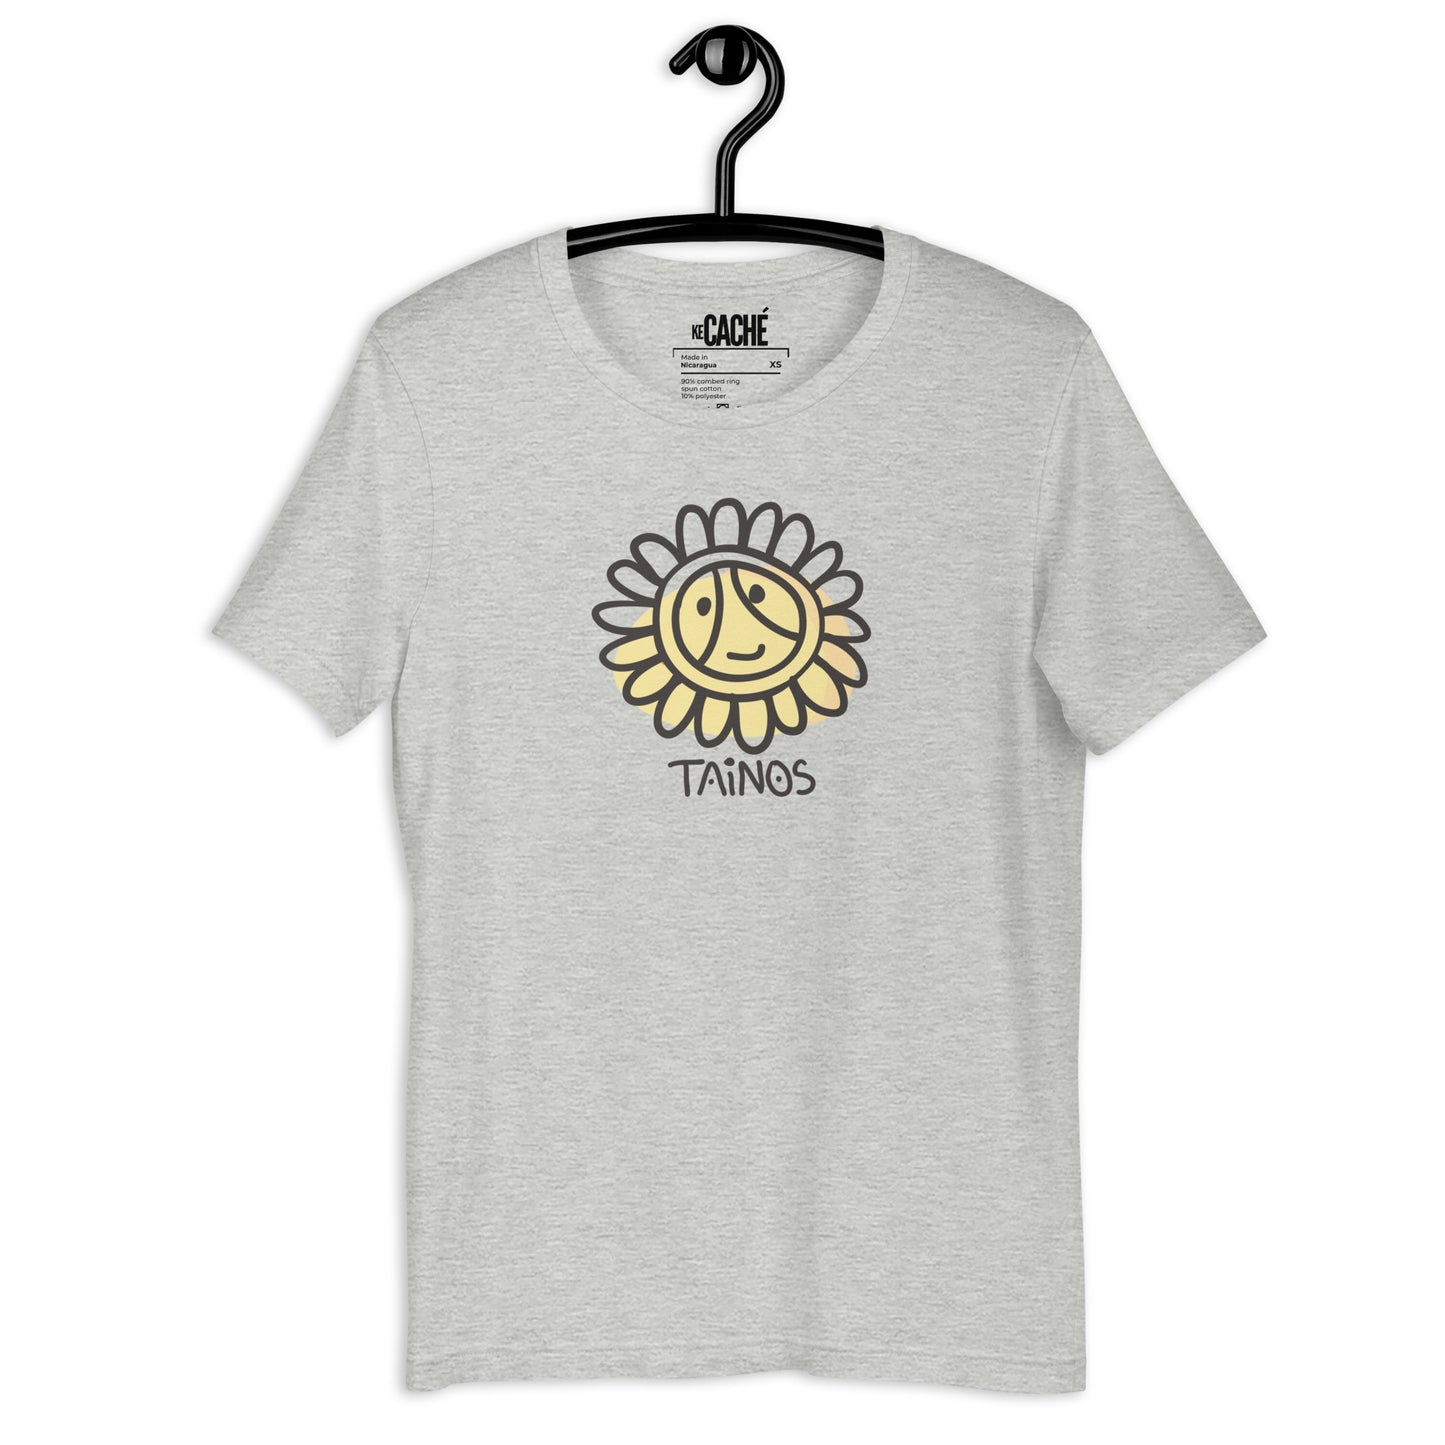 KeCaché Taino Sun Symbol T-Shirt: Embrace Dominican Heritage in Style!